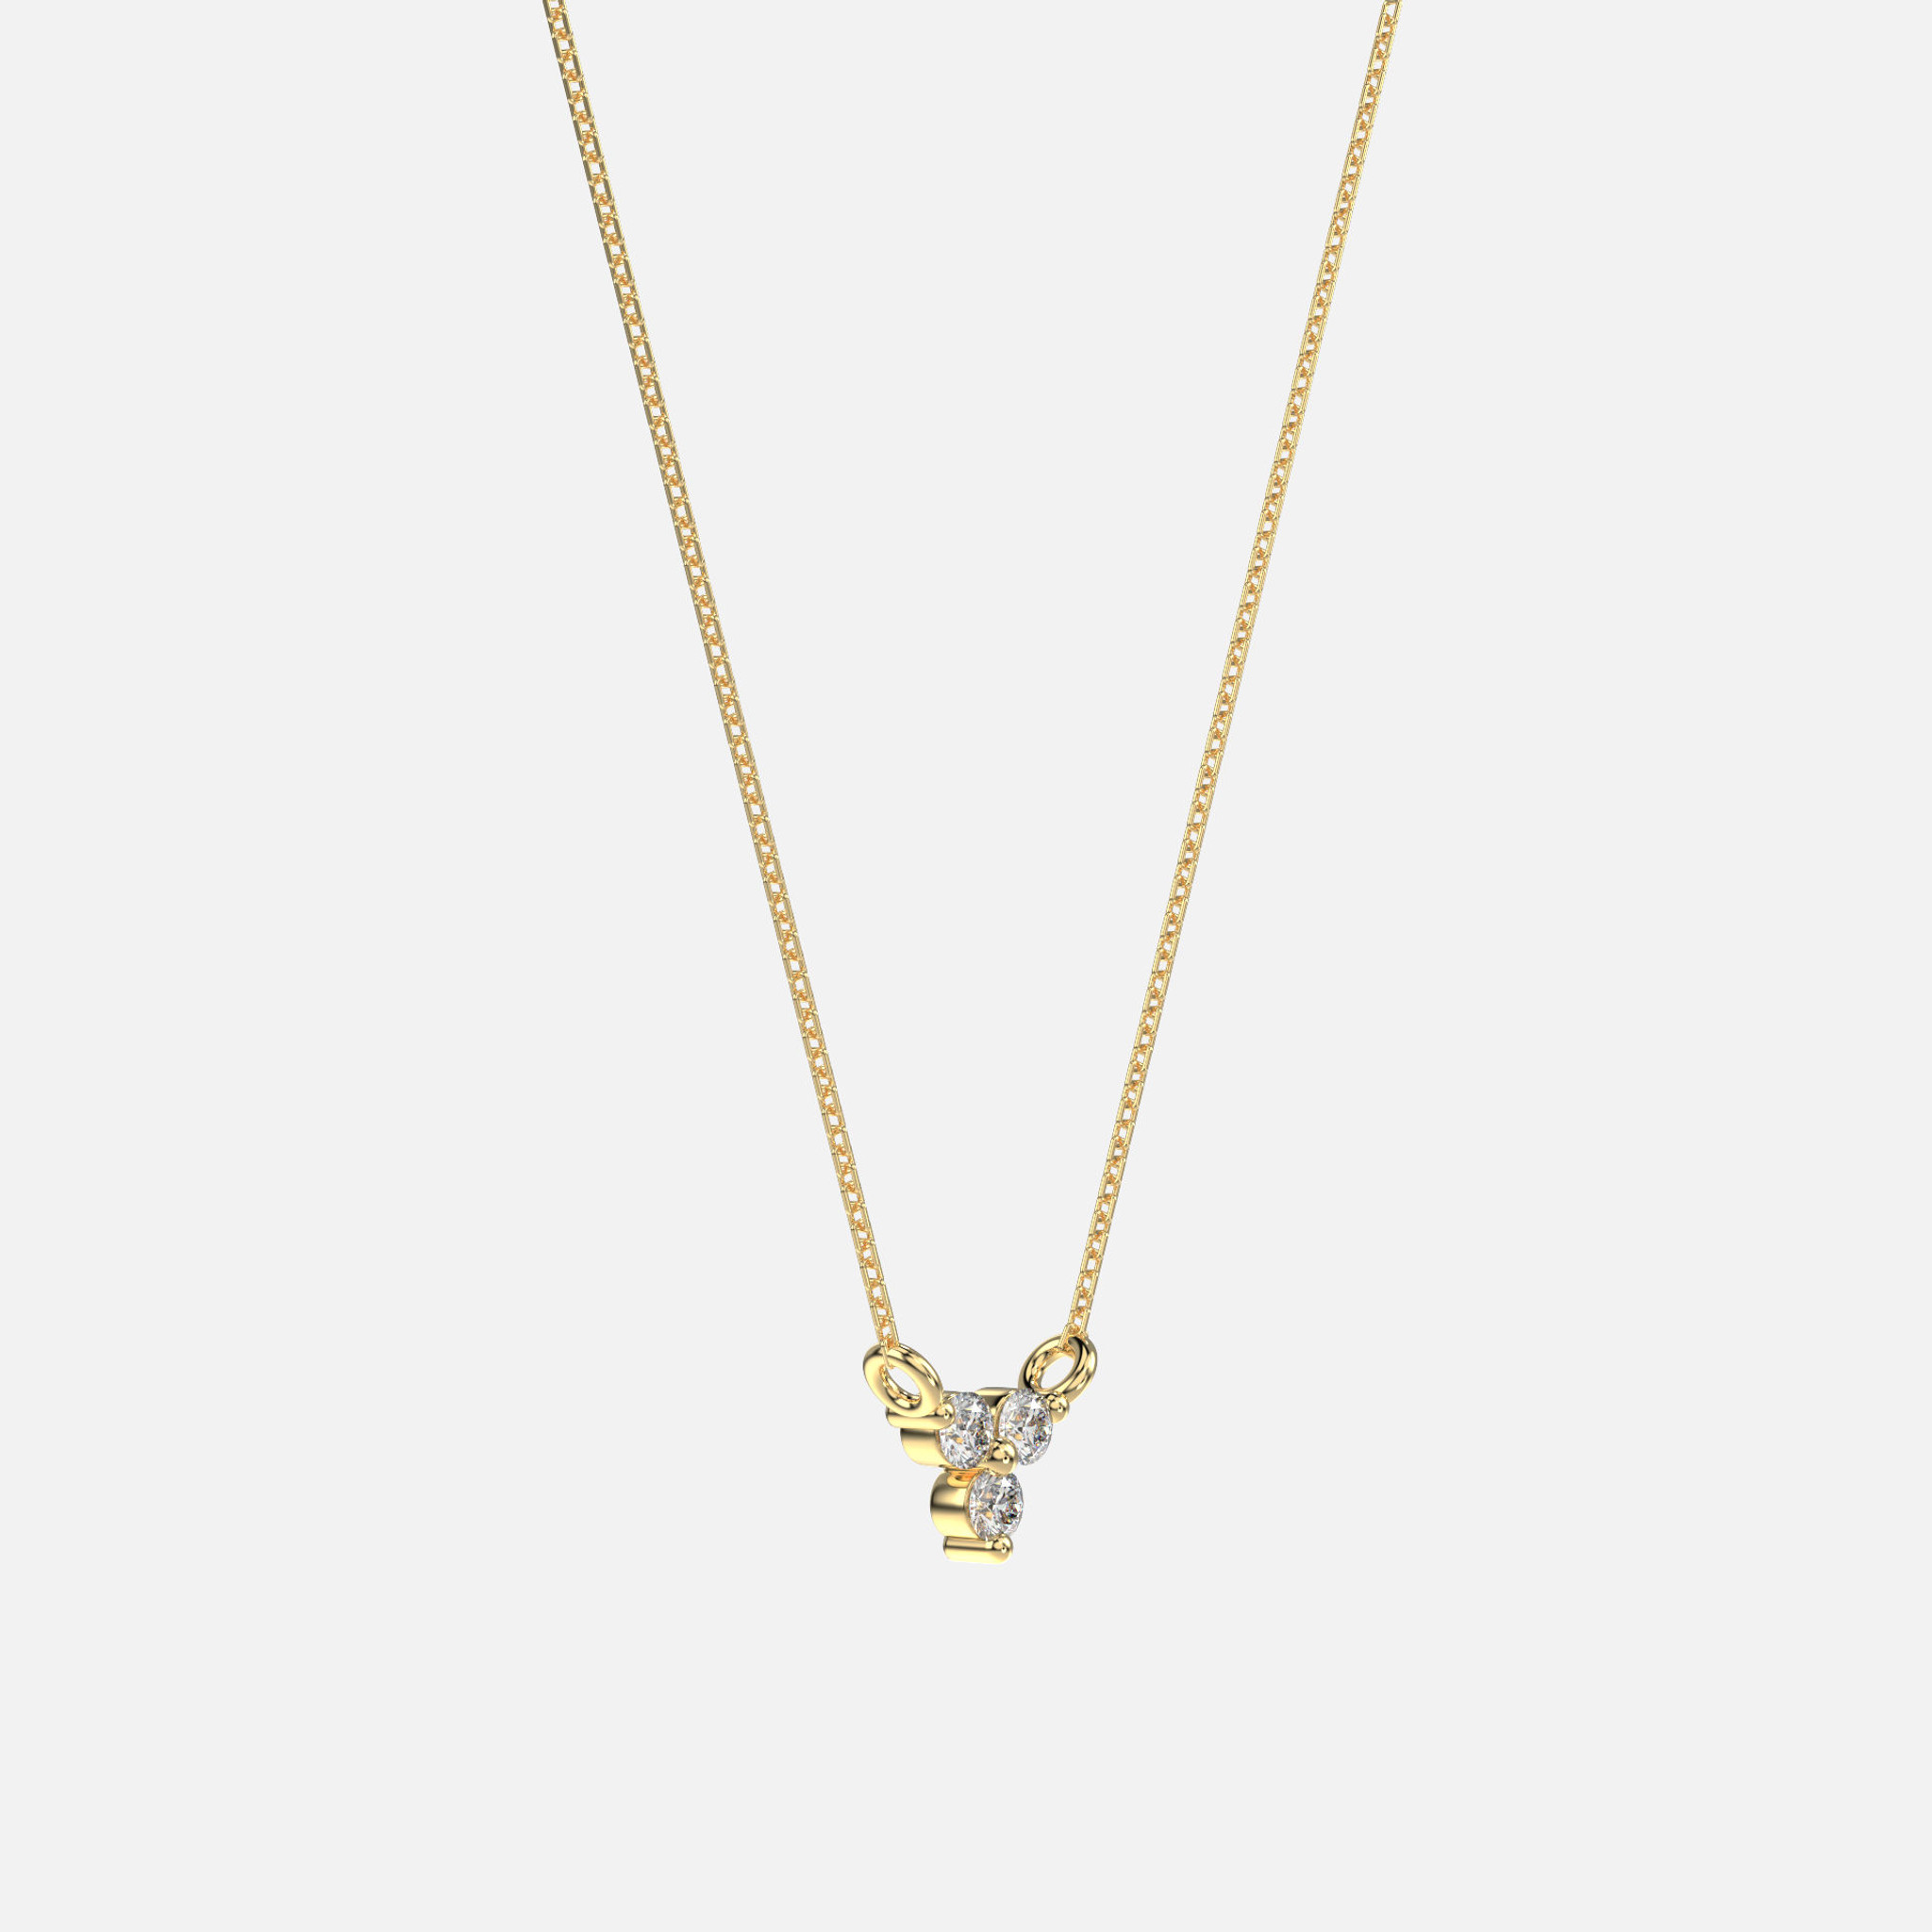 Delicate gold accessories, such as the 14k yellow gold diamond trio necklace, hold intricate meanings and can be layered for a chic statement.